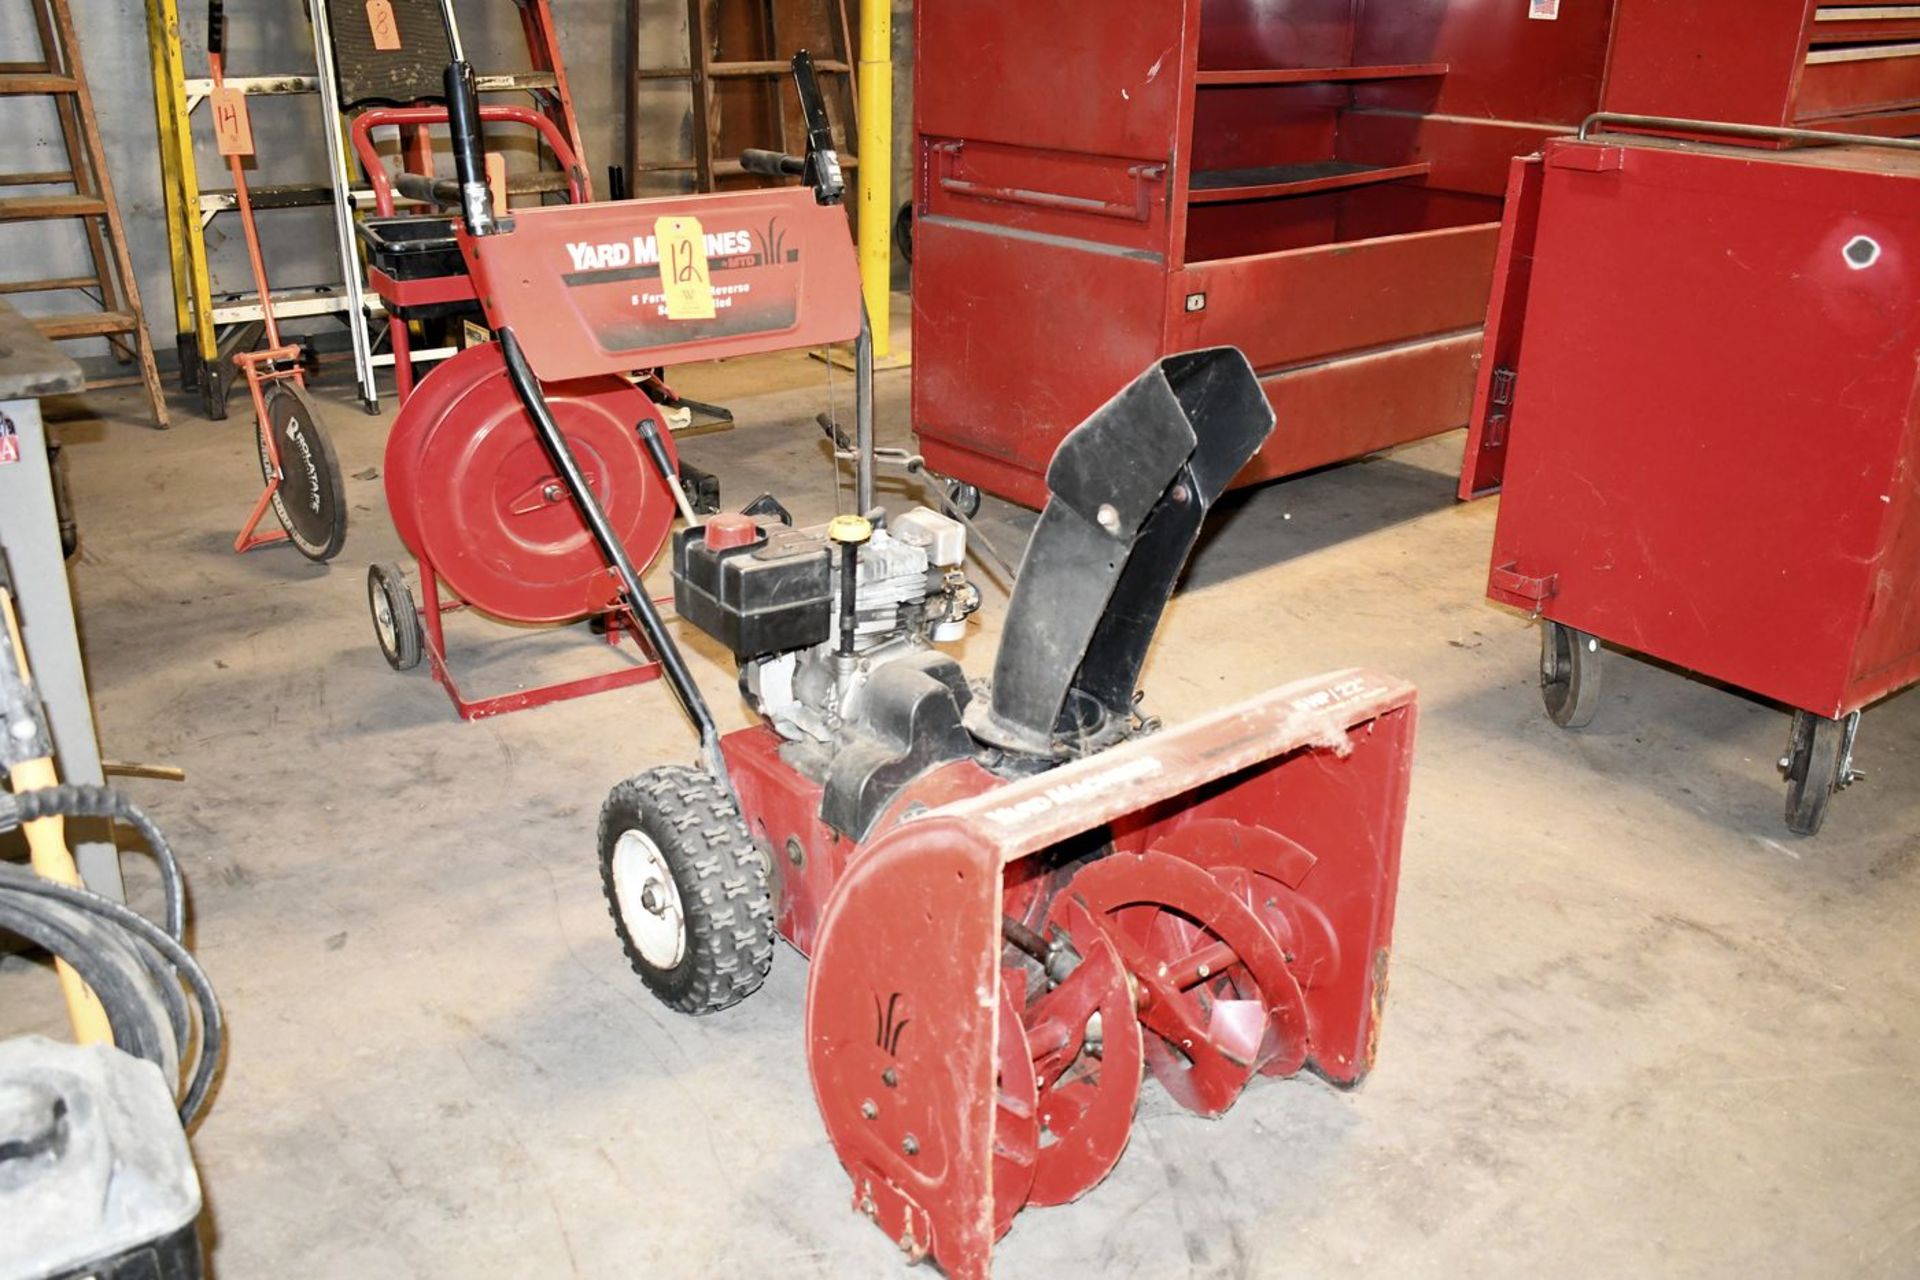 Yard Machines 5-HP x 22" 2-Stage 12" Impeller Gas Powered Self Propelled Snow Thrower - Image 2 of 2